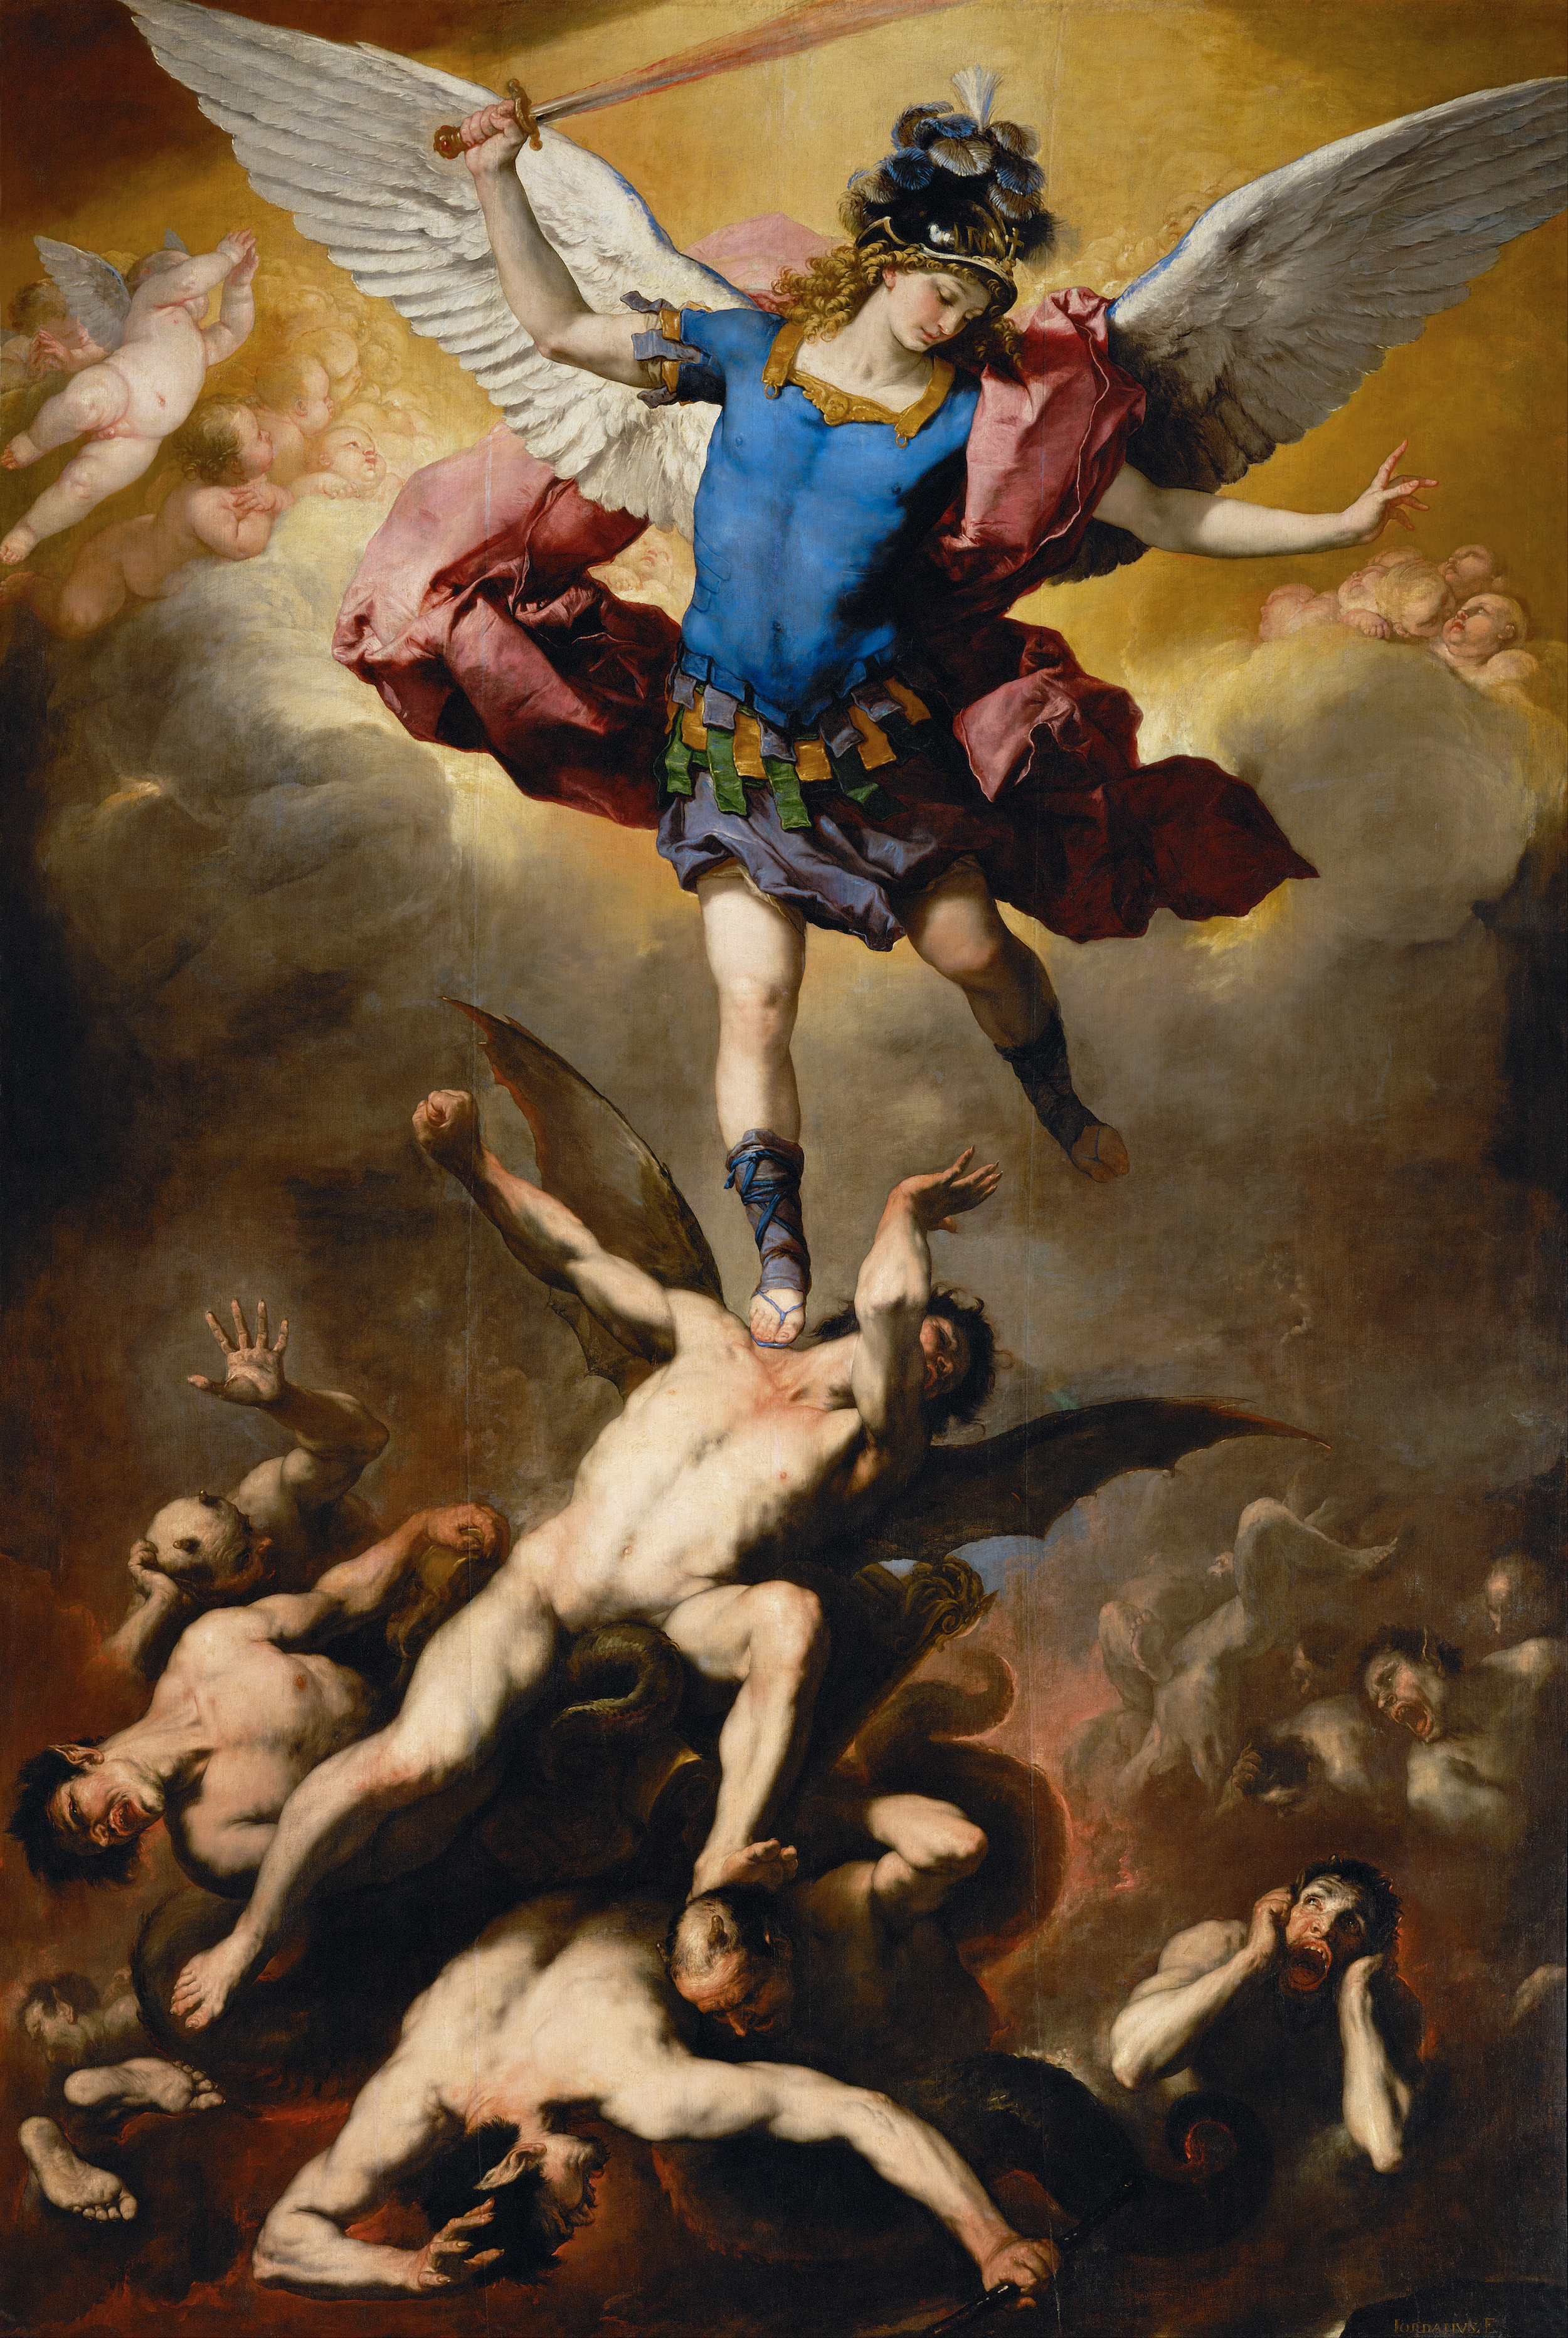 A queda dos anjos rebeldes by Luca Giordano - 1660/1665 Kunsthistorisches Museum